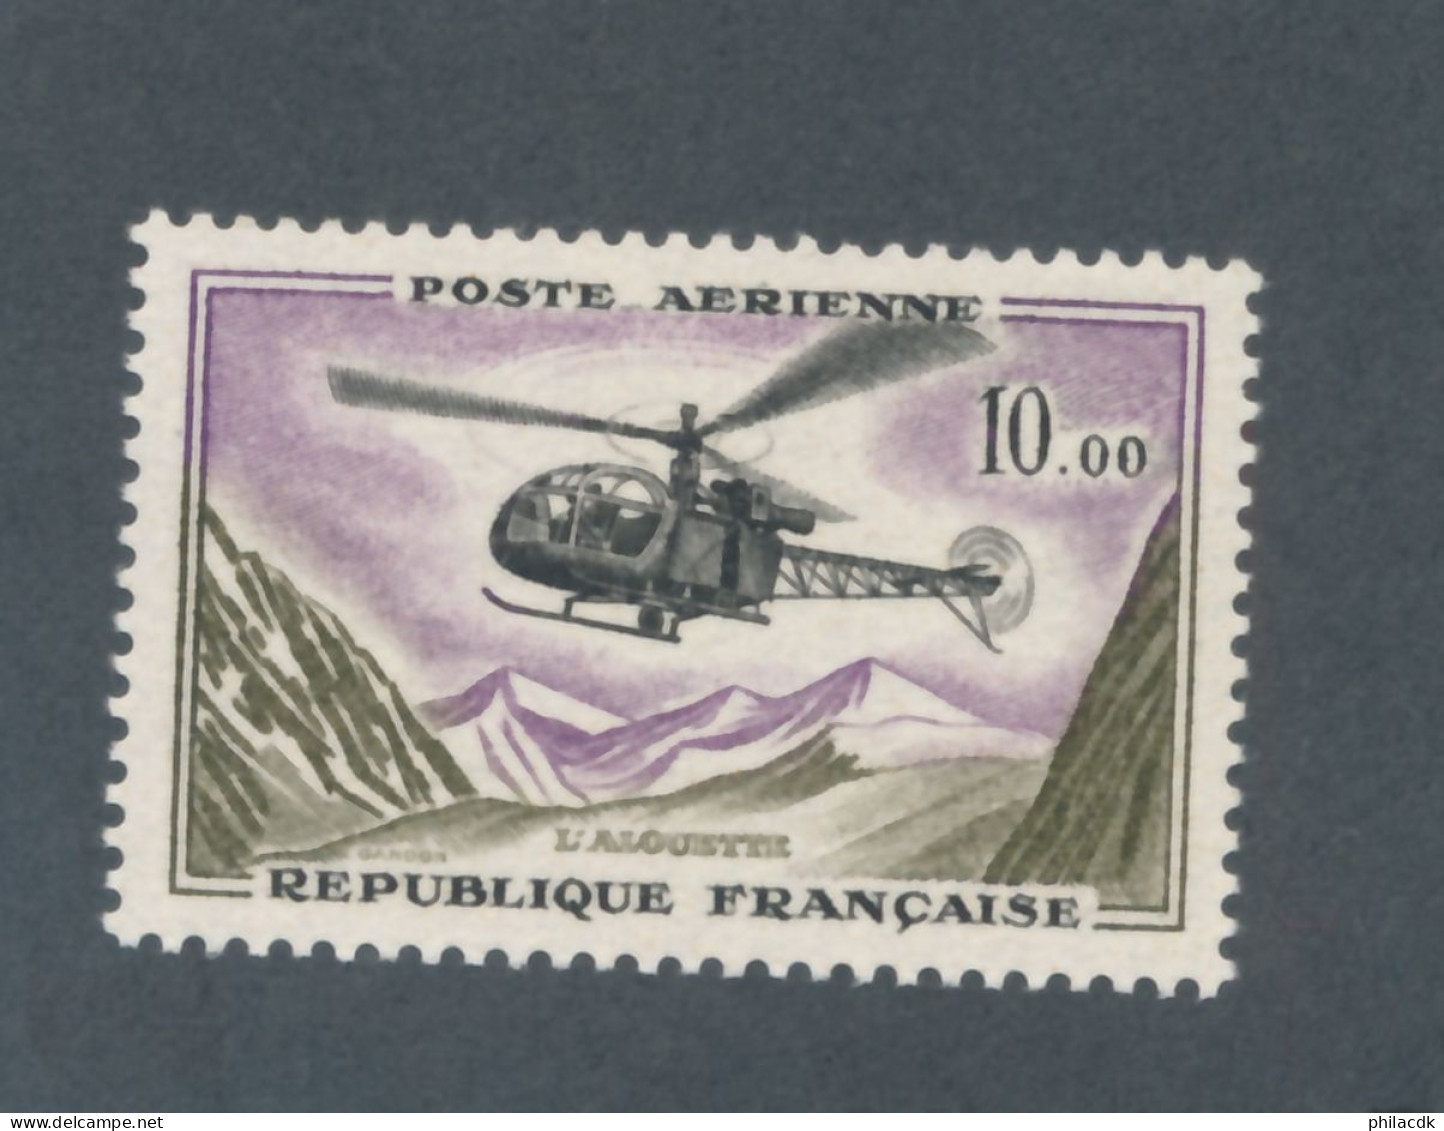 FRANCE - POSTE AERIENNE N° 41 NEUF* AVEC CHARNIERE - COTE : 20€ - 1960/64 - 1927-1959 Mint/hinged